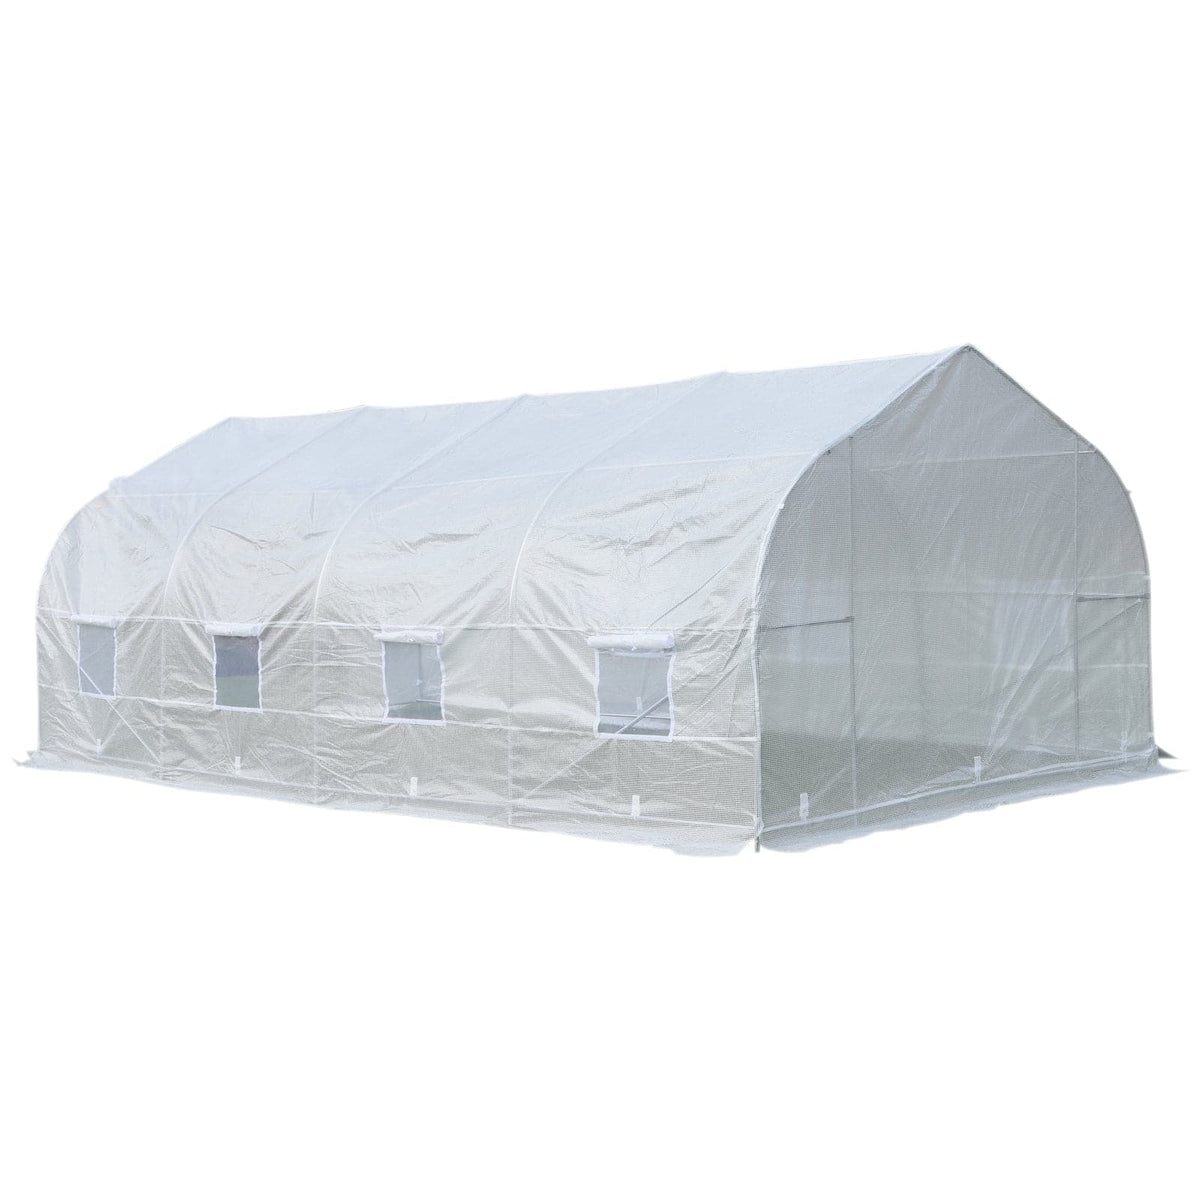 An Aosom Outsunny 20&#39; x 10&#39; x 7&#39; Deluxe High Tunnel Walk-in Garden Greenhouse Kit - White, filled with crops and plants on a white background.